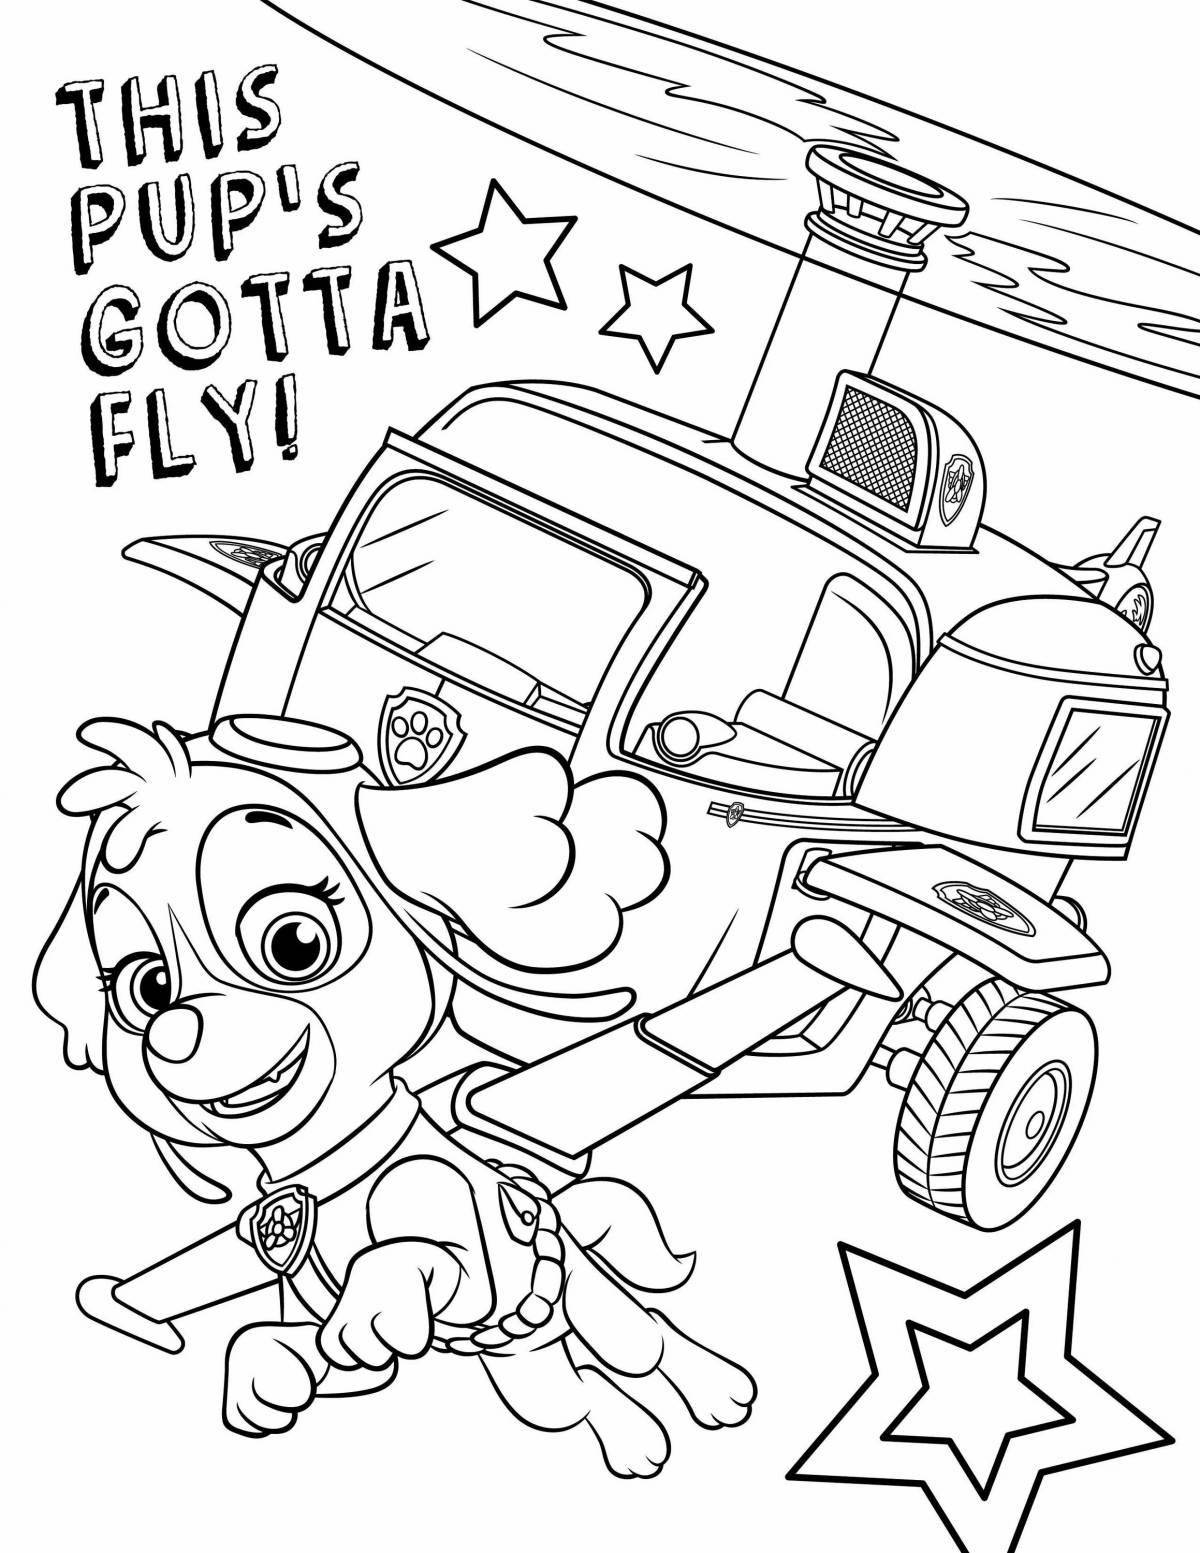 Coloring page of a magnificent racing car